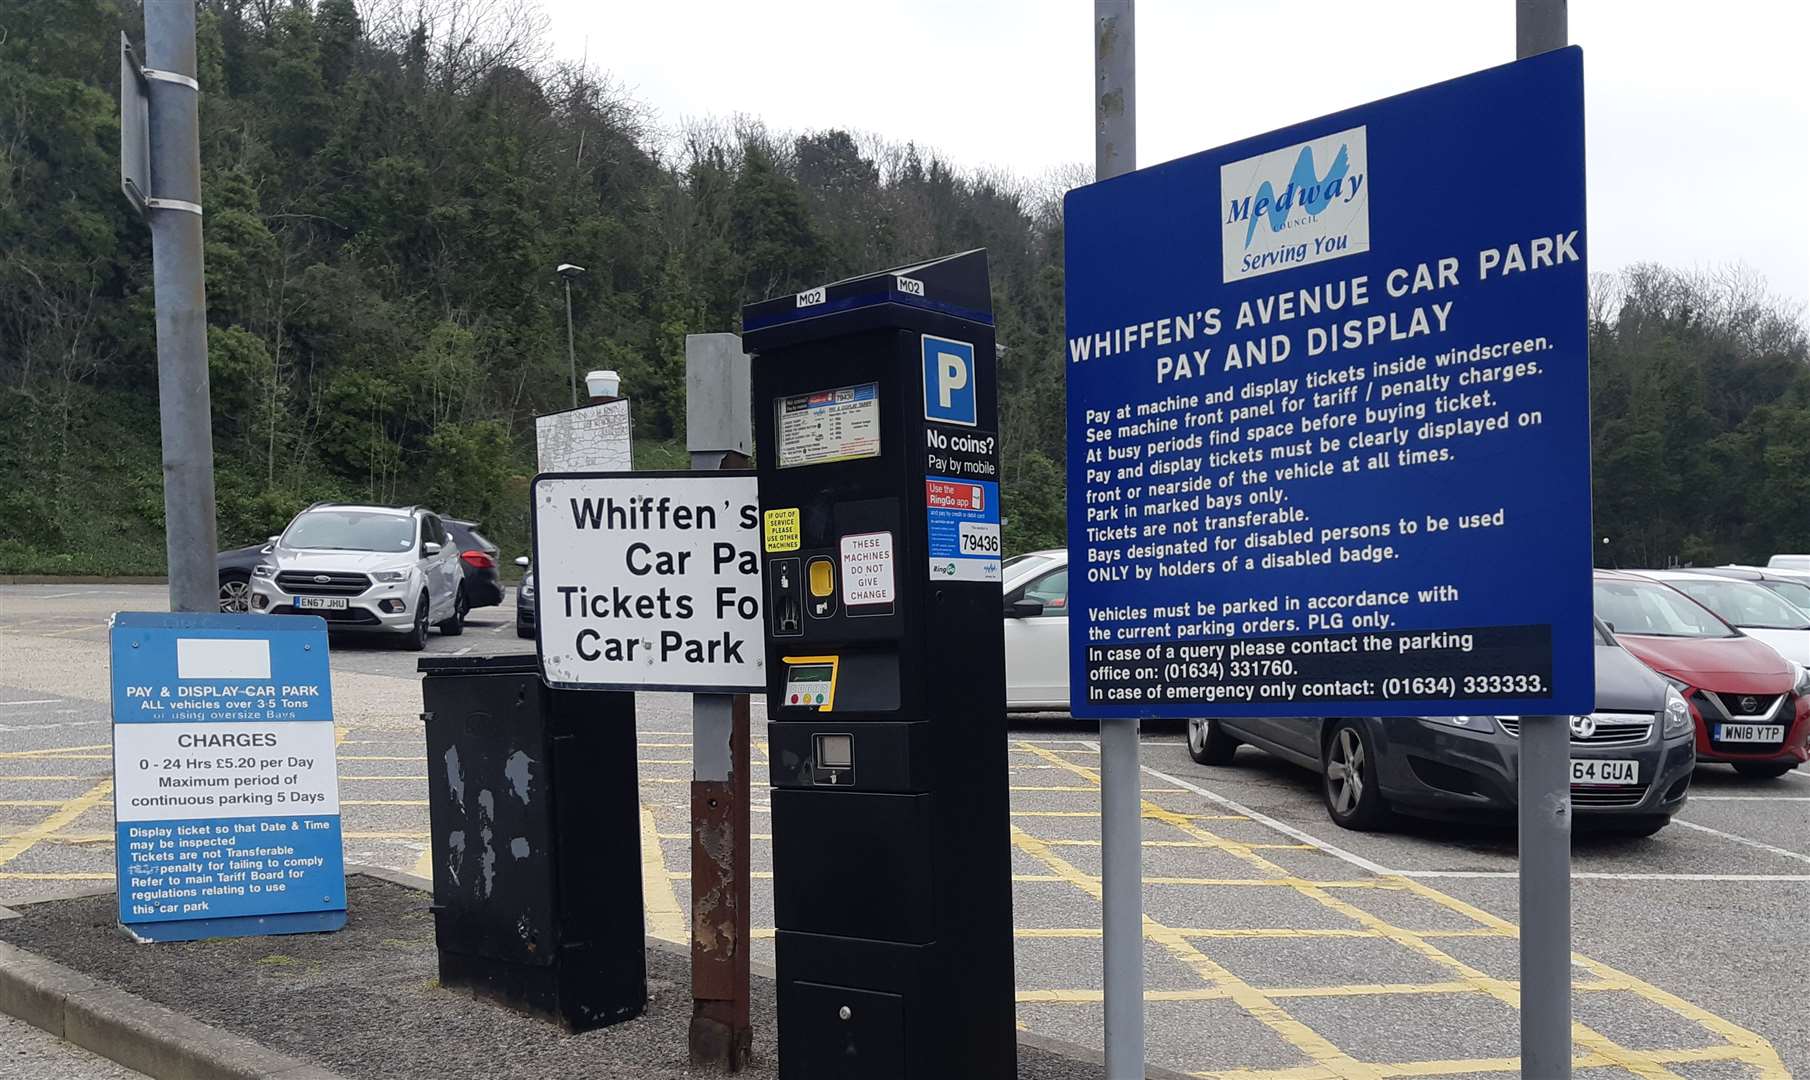 Medway Council offer various parking permits